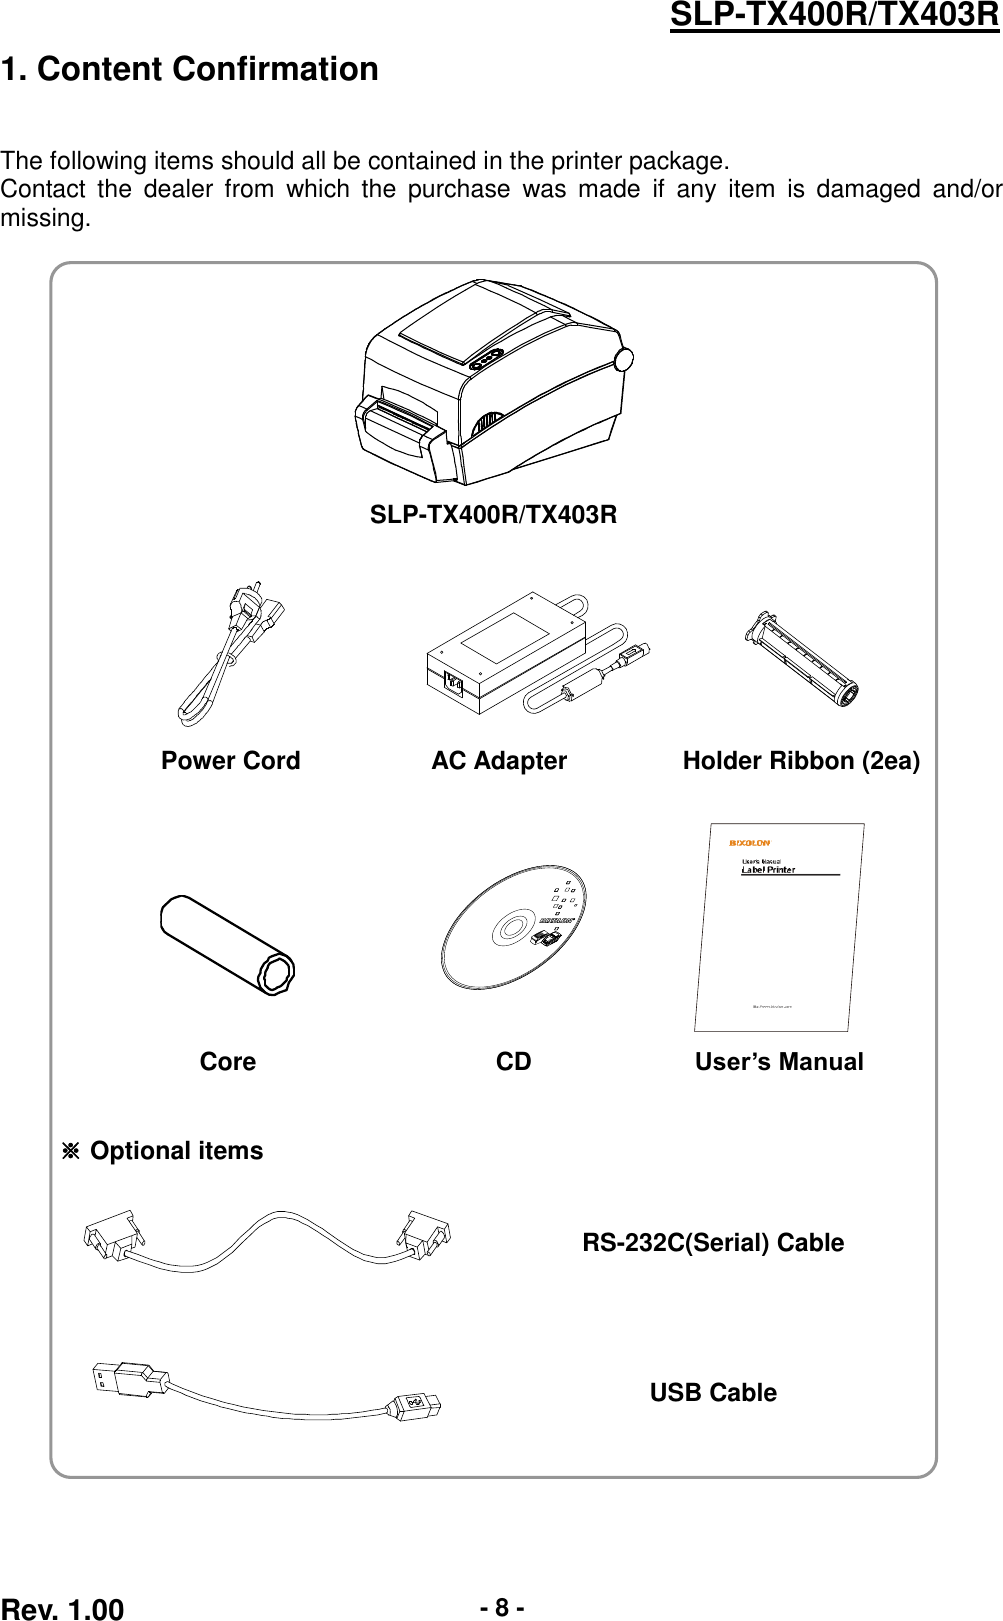  Rev. 1.00 - 8 - SLP-TX400R/TX403R 1. Content Confirmation   The following items should all be contained in the printer package. Contact  the  dealer  from  which  the  purchase  was  made  if  any  item  is  damaged  and/or missing.    SLP-TX400R/TX403R      Power Cord AC Adapter Holder Ribbon (2ea)      Core CD User’s Manual   ※ Optional items    RS-232C(Serial) Cable    USB Cable   